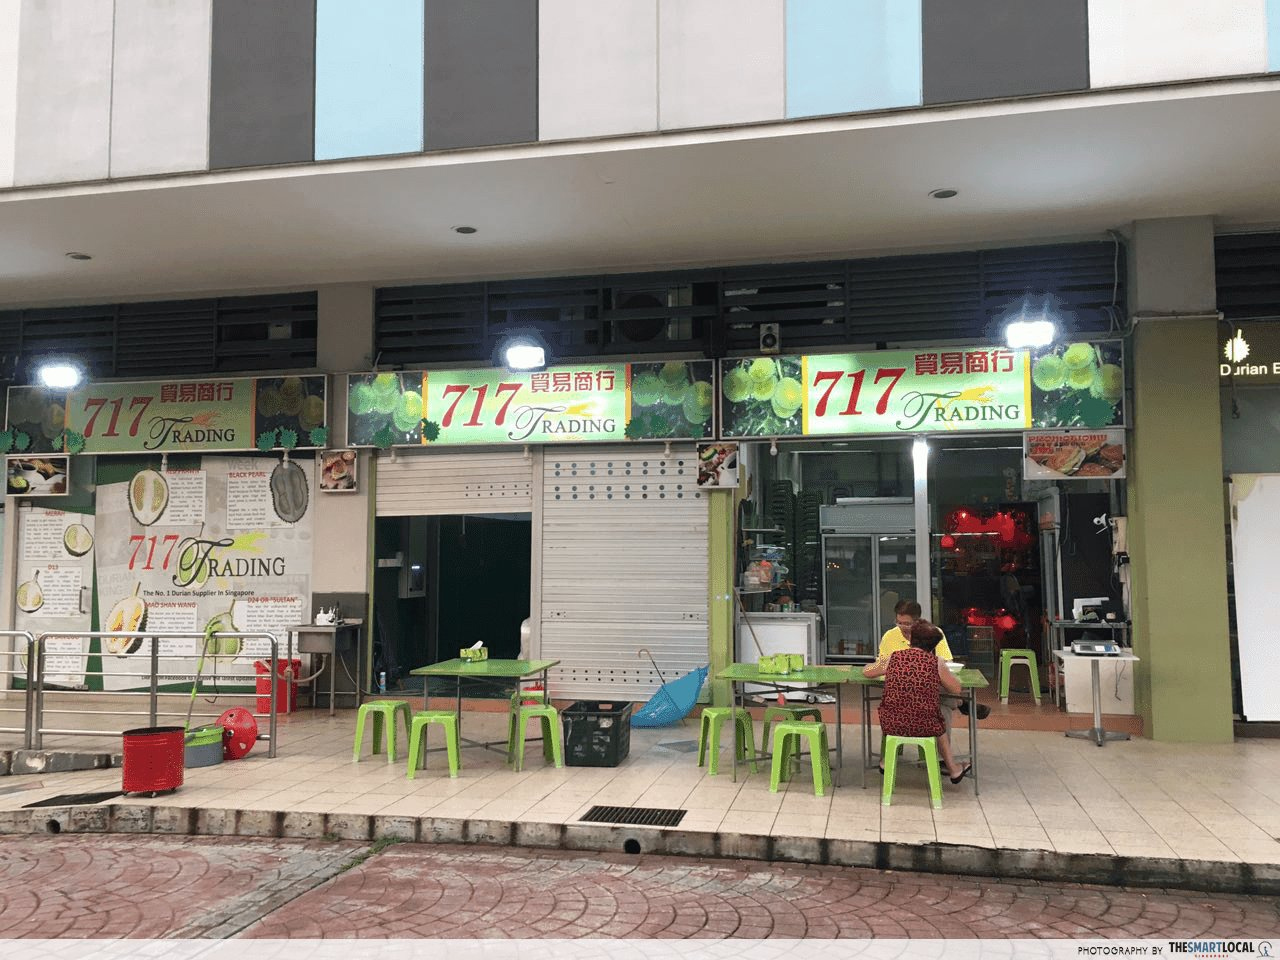 roadside durian stalls - durian mpire by 717 trading